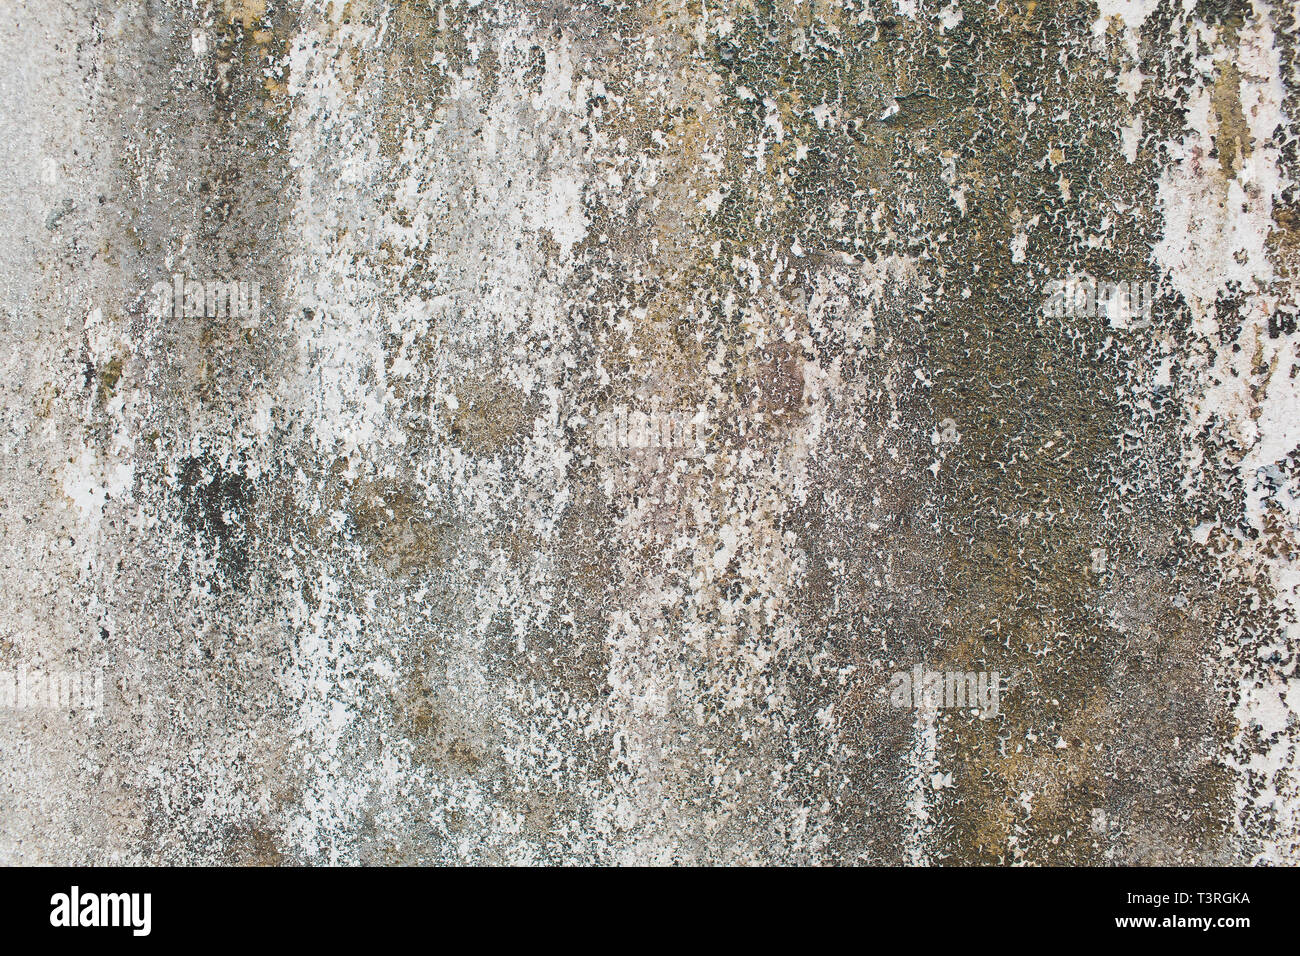 Wall with green mold and dirt on the surface. Stock Photo